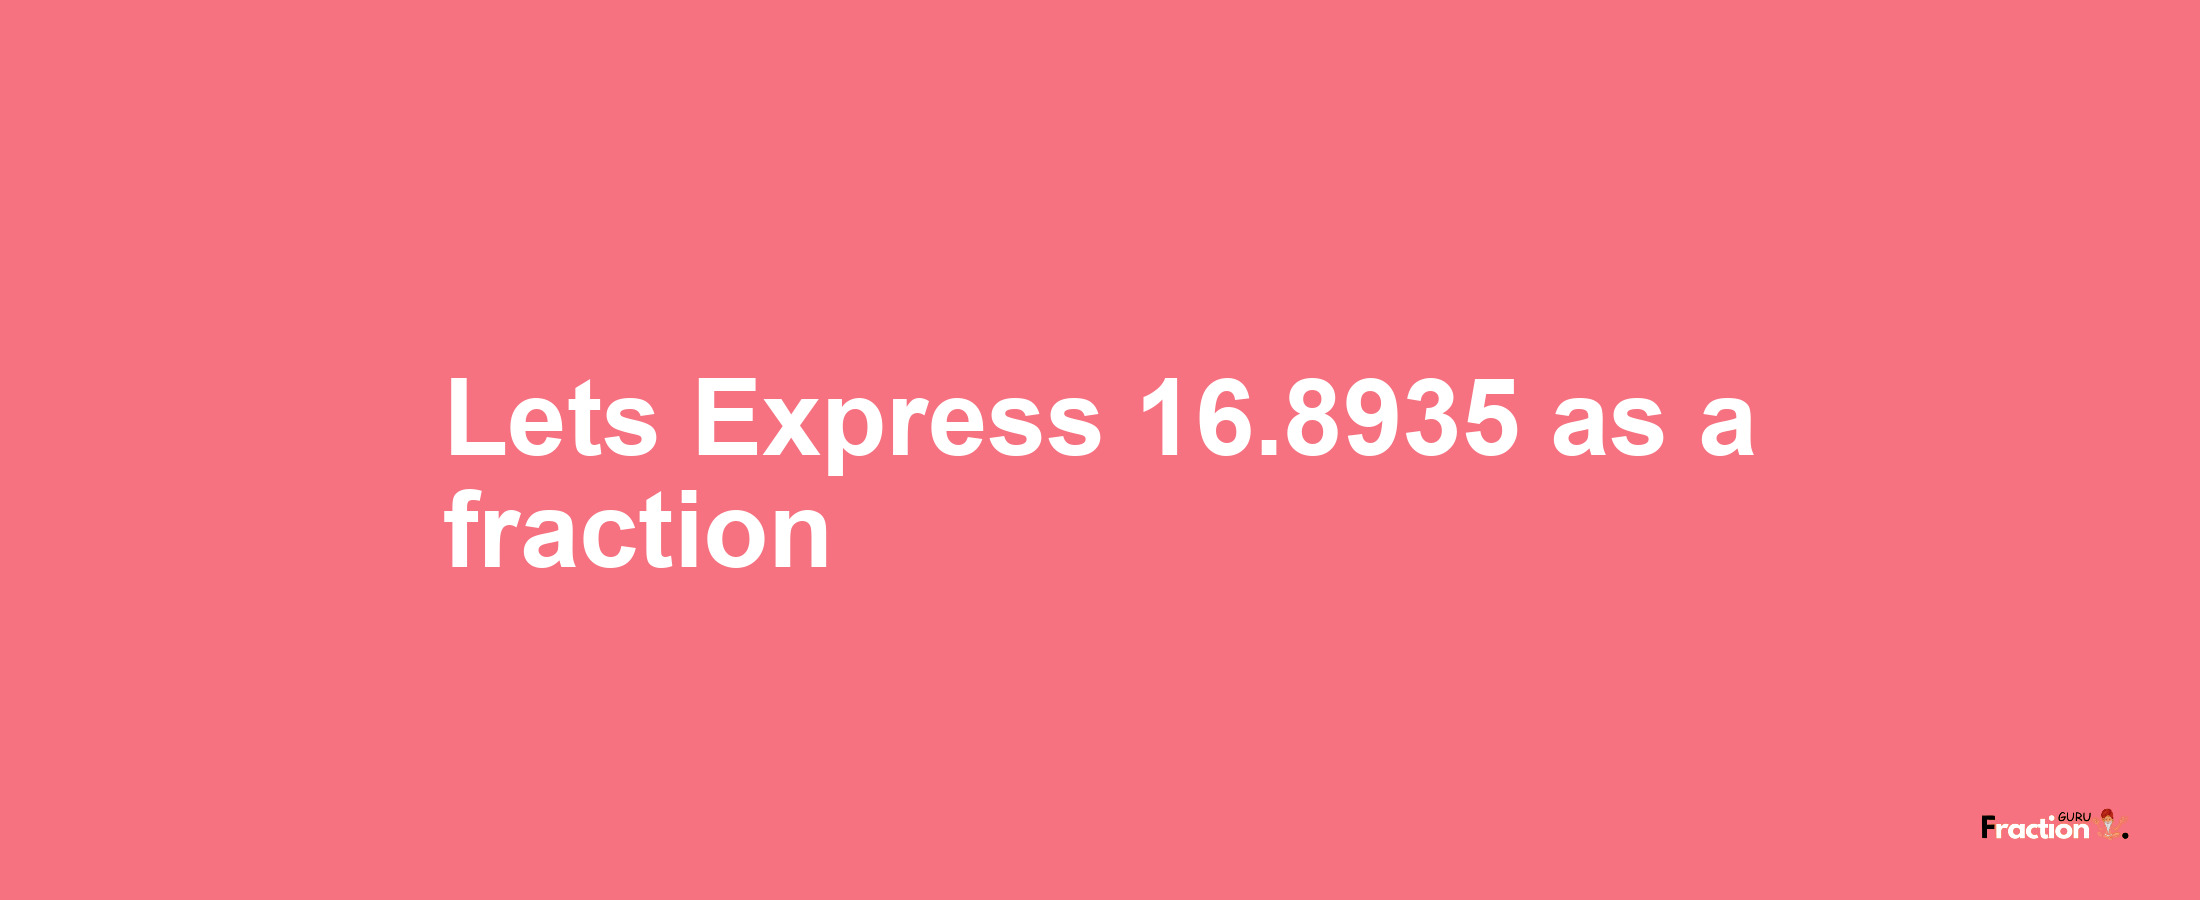 Lets Express 16.8935 as afraction